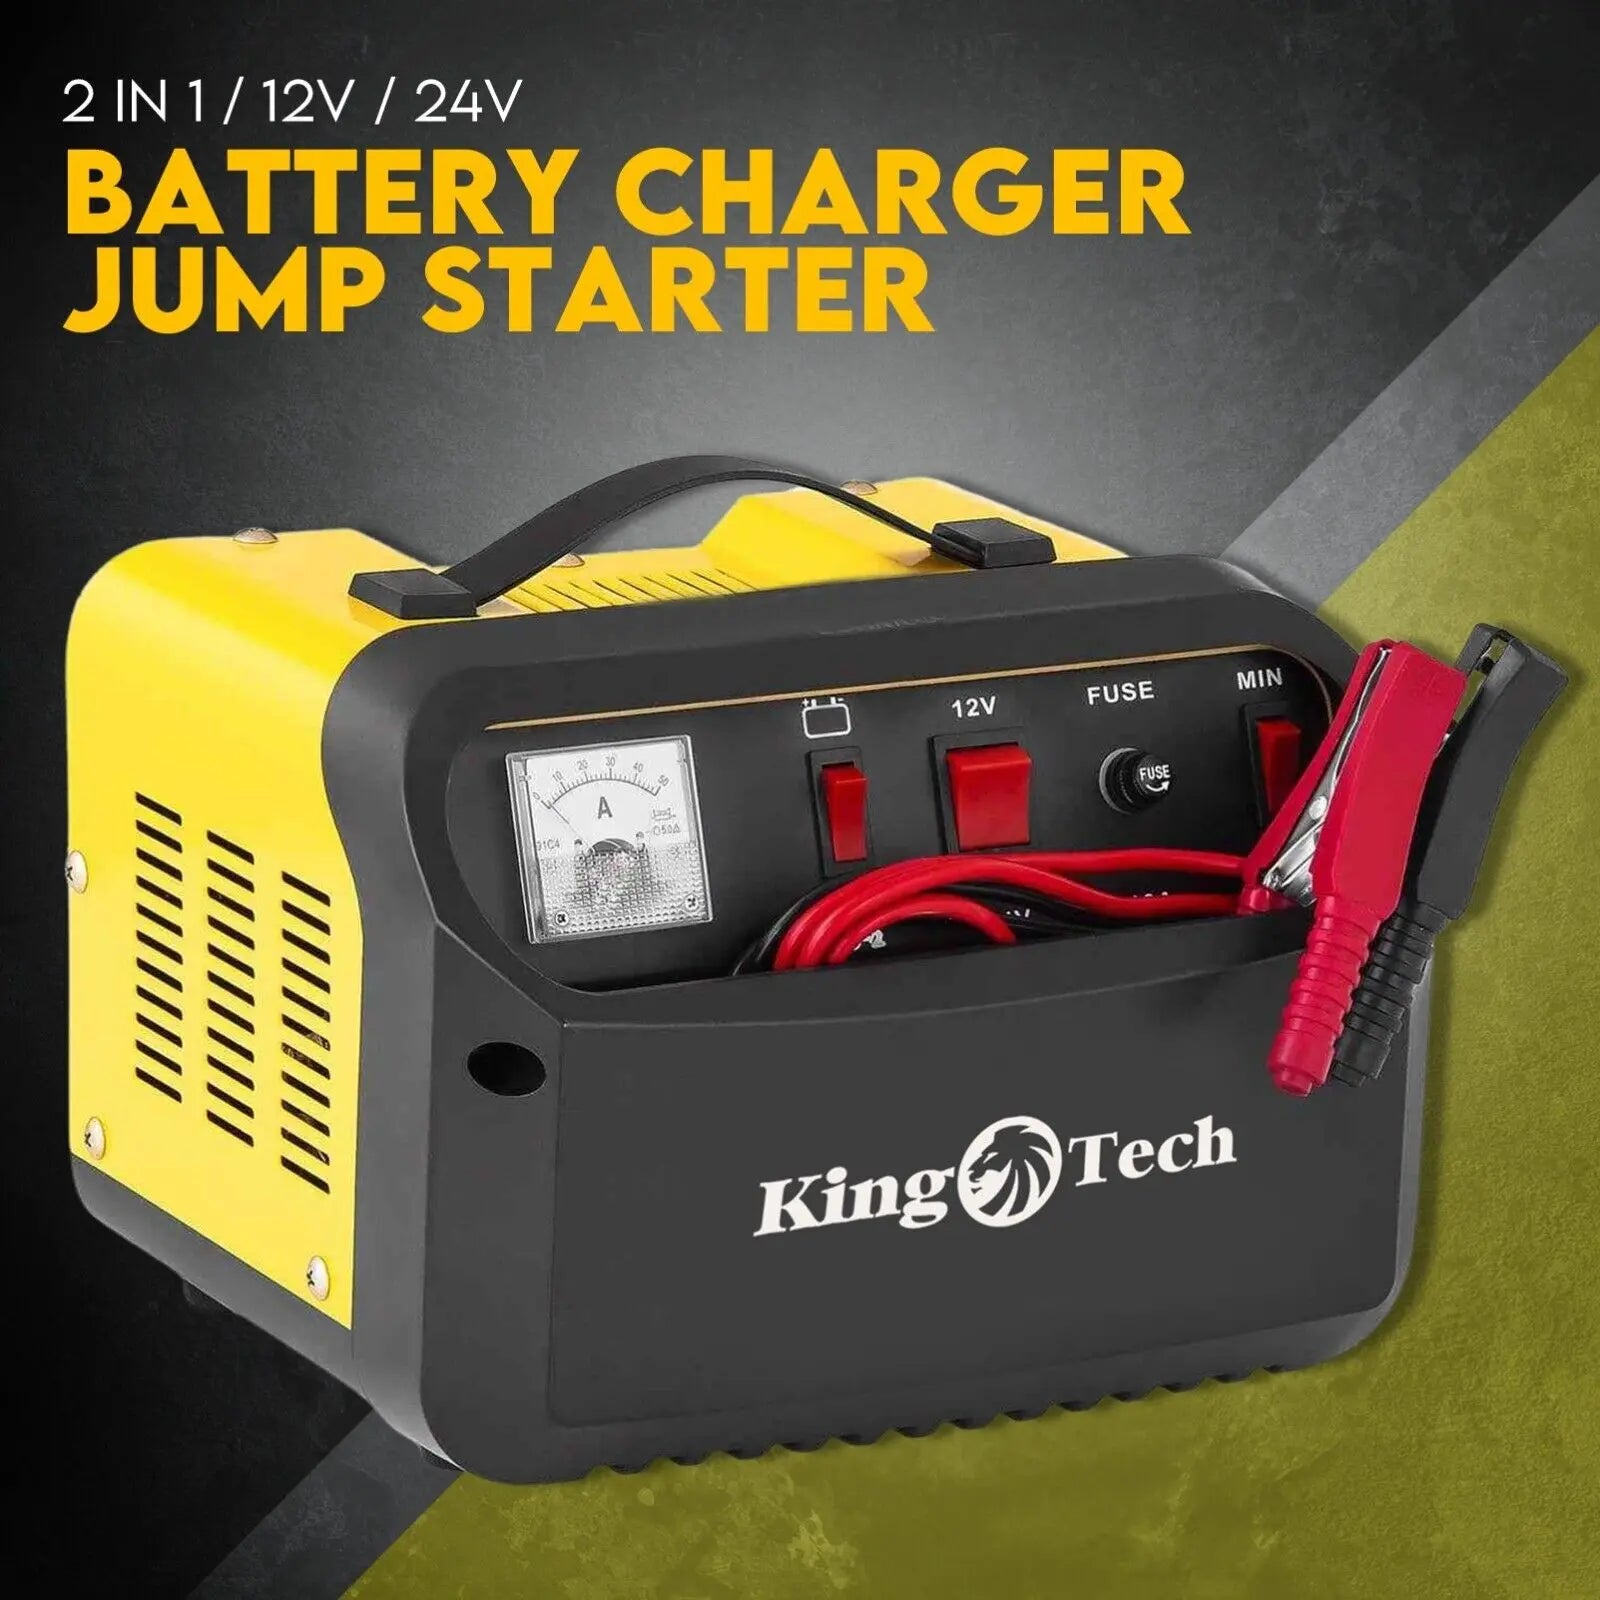 2IN1 Car Battery Charger Jump Starter 12V 24V 40A ATV Boat Tractor from Deals499 at Deals499